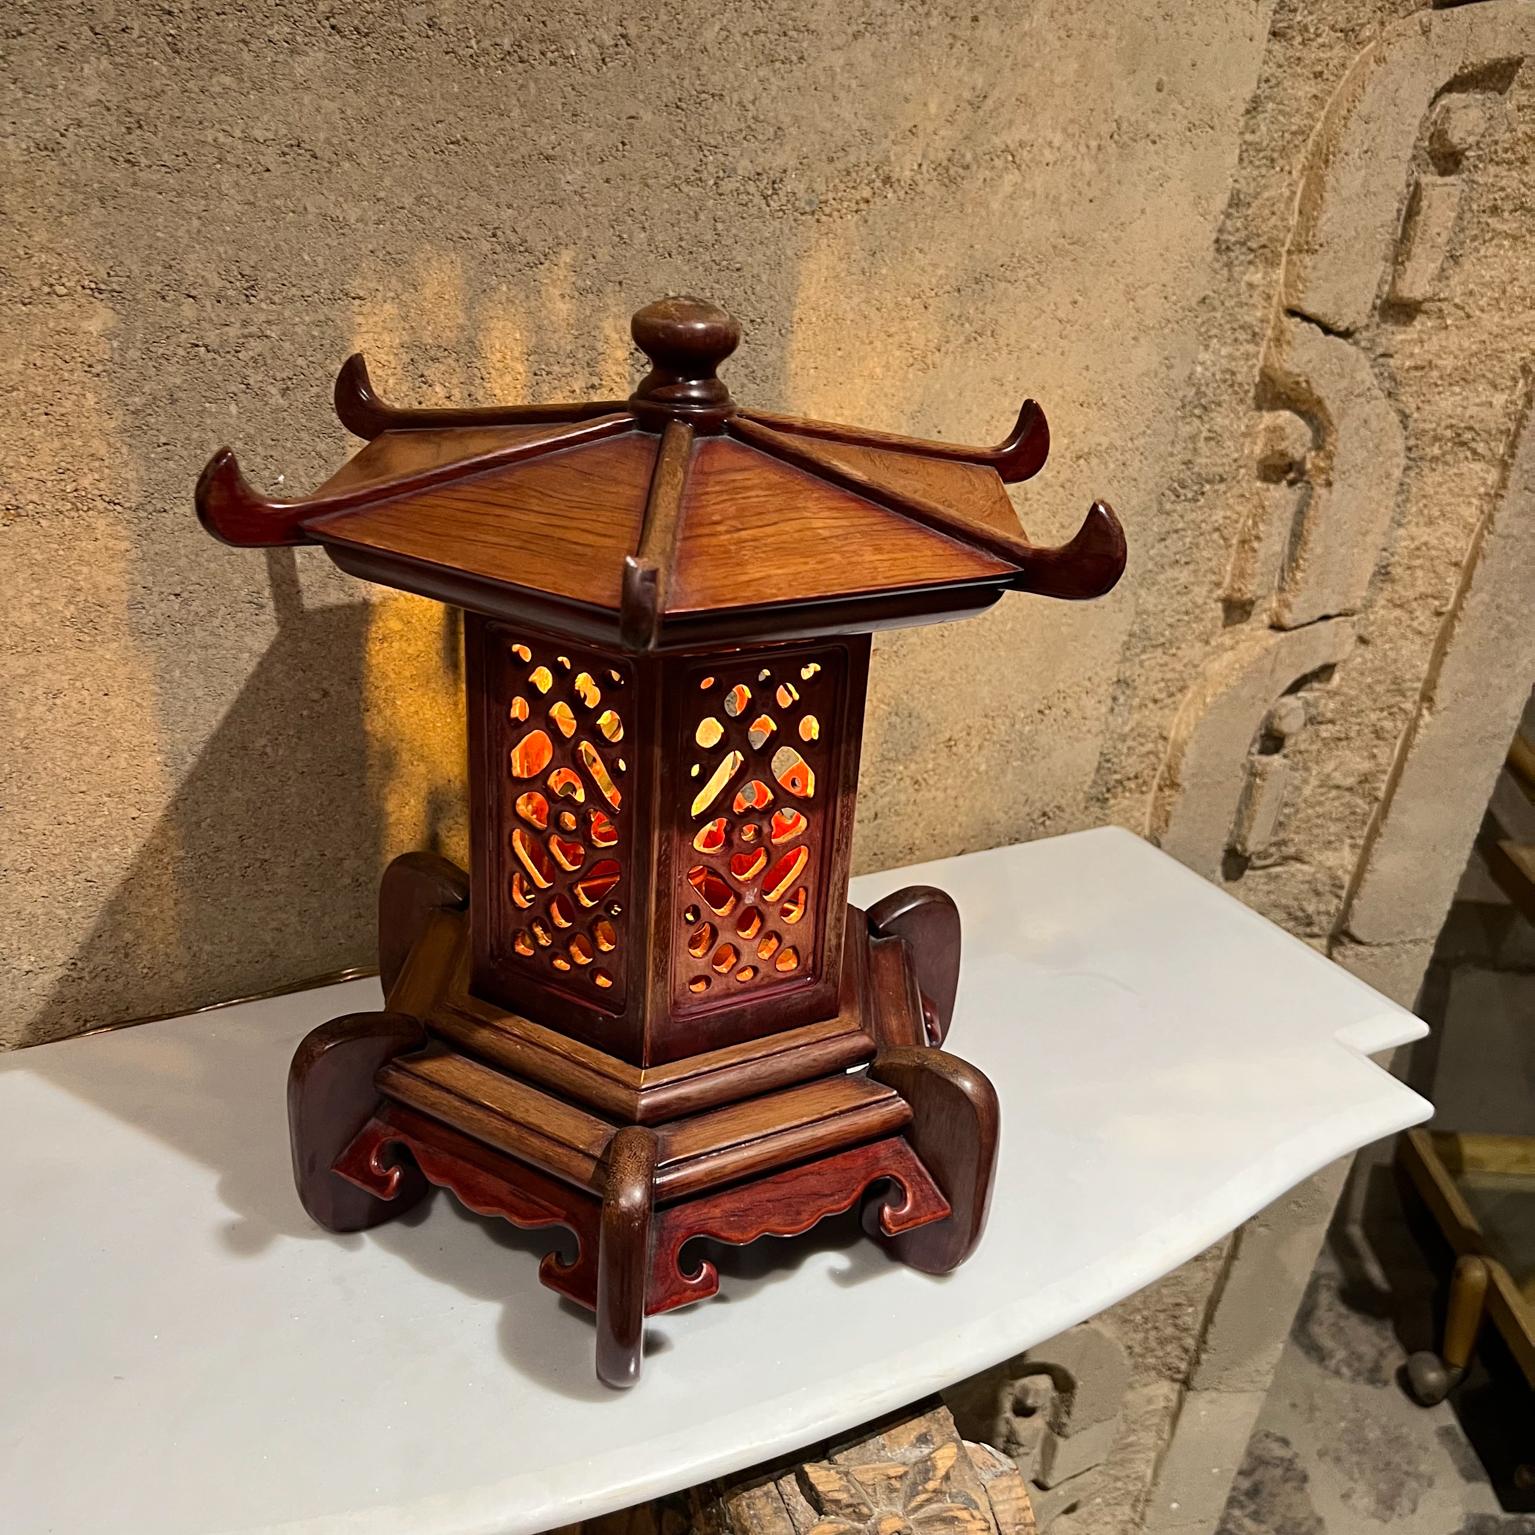 1950s Stunning Vintage Pagoda Table Lamp Intricate Handcrafted Wood In Good Condition For Sale In Chula Vista, CA